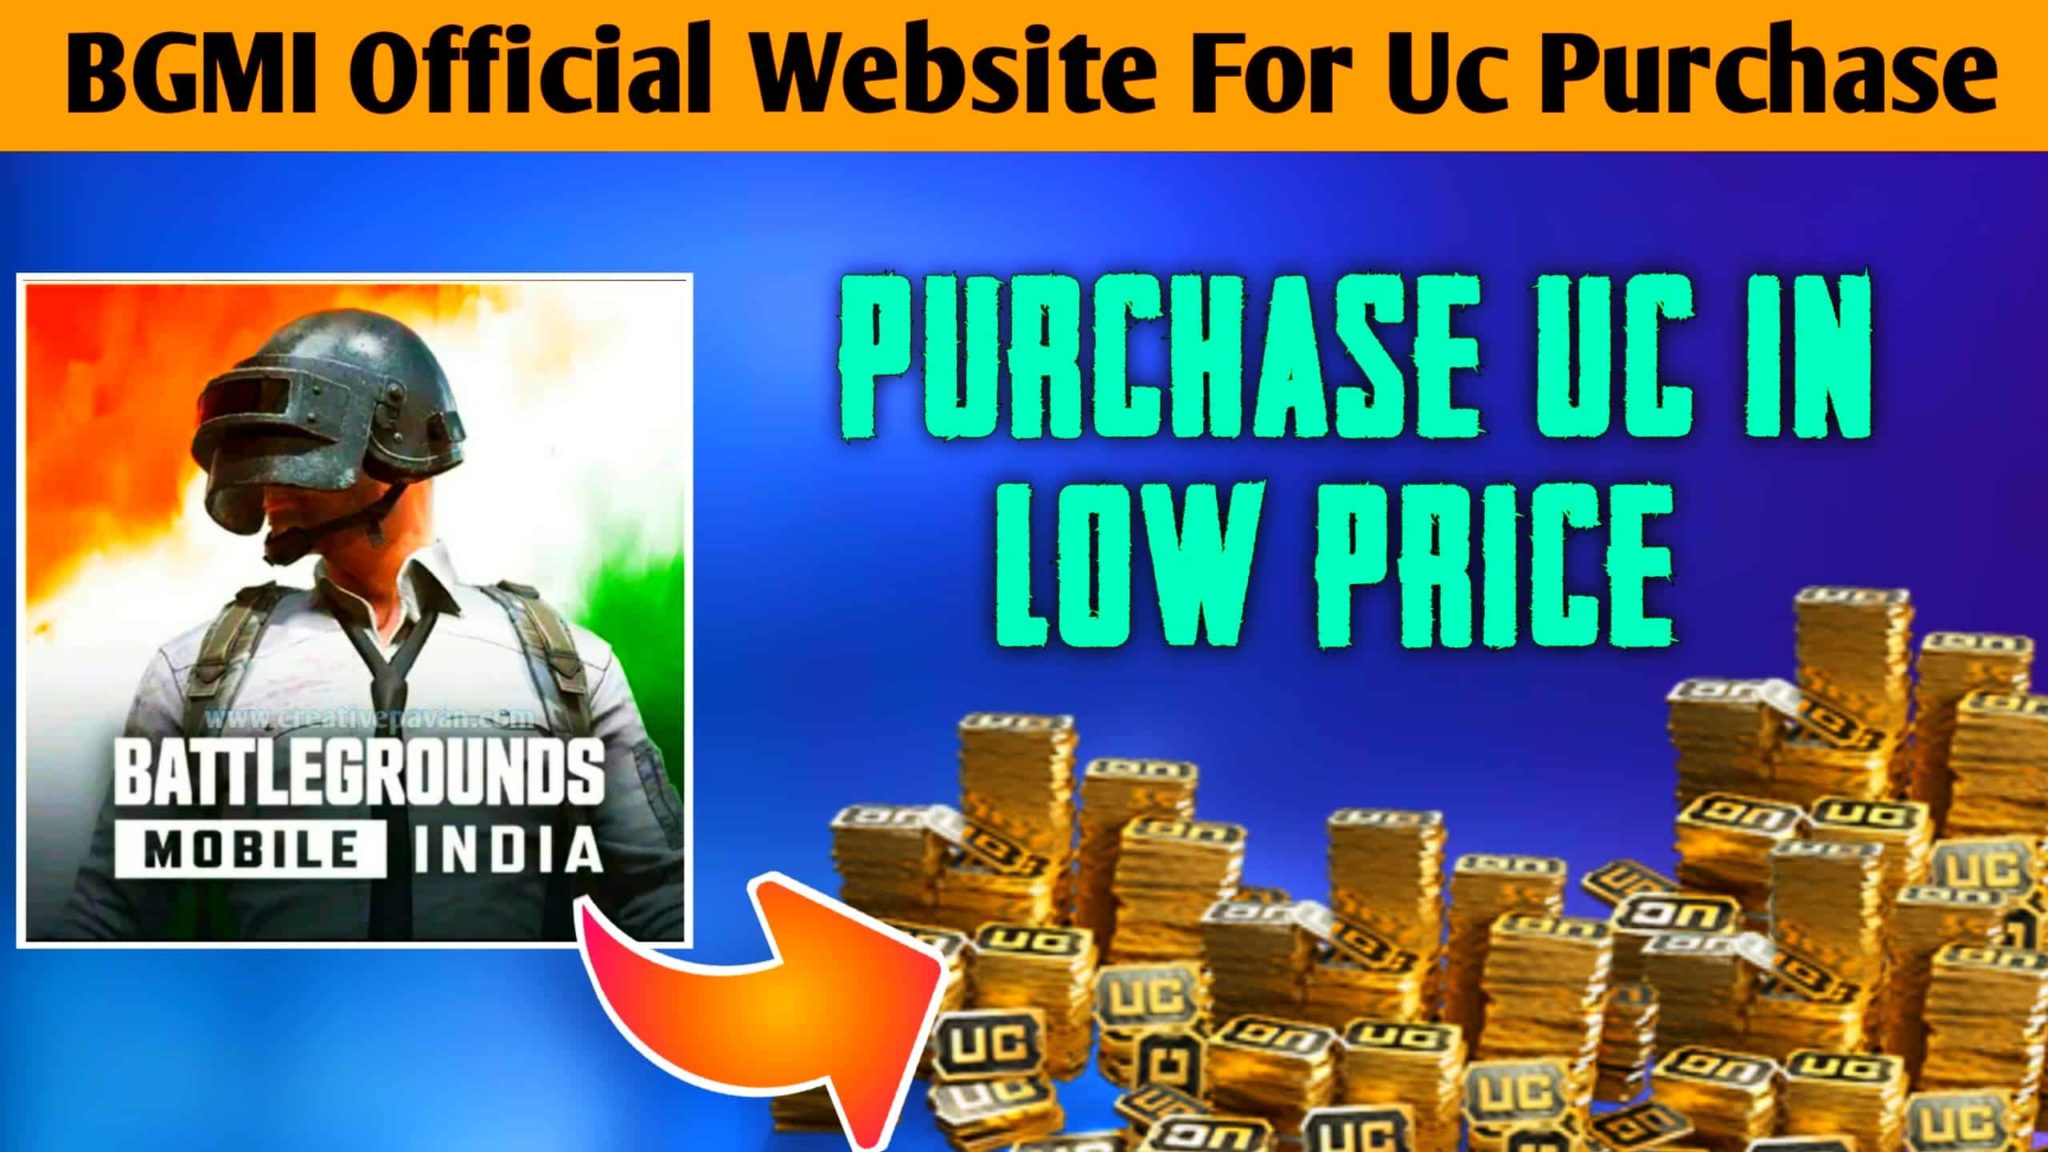 Purchase BGMI UC From Codashop - Battlegrounds Mobile India Official UC Purchase Website